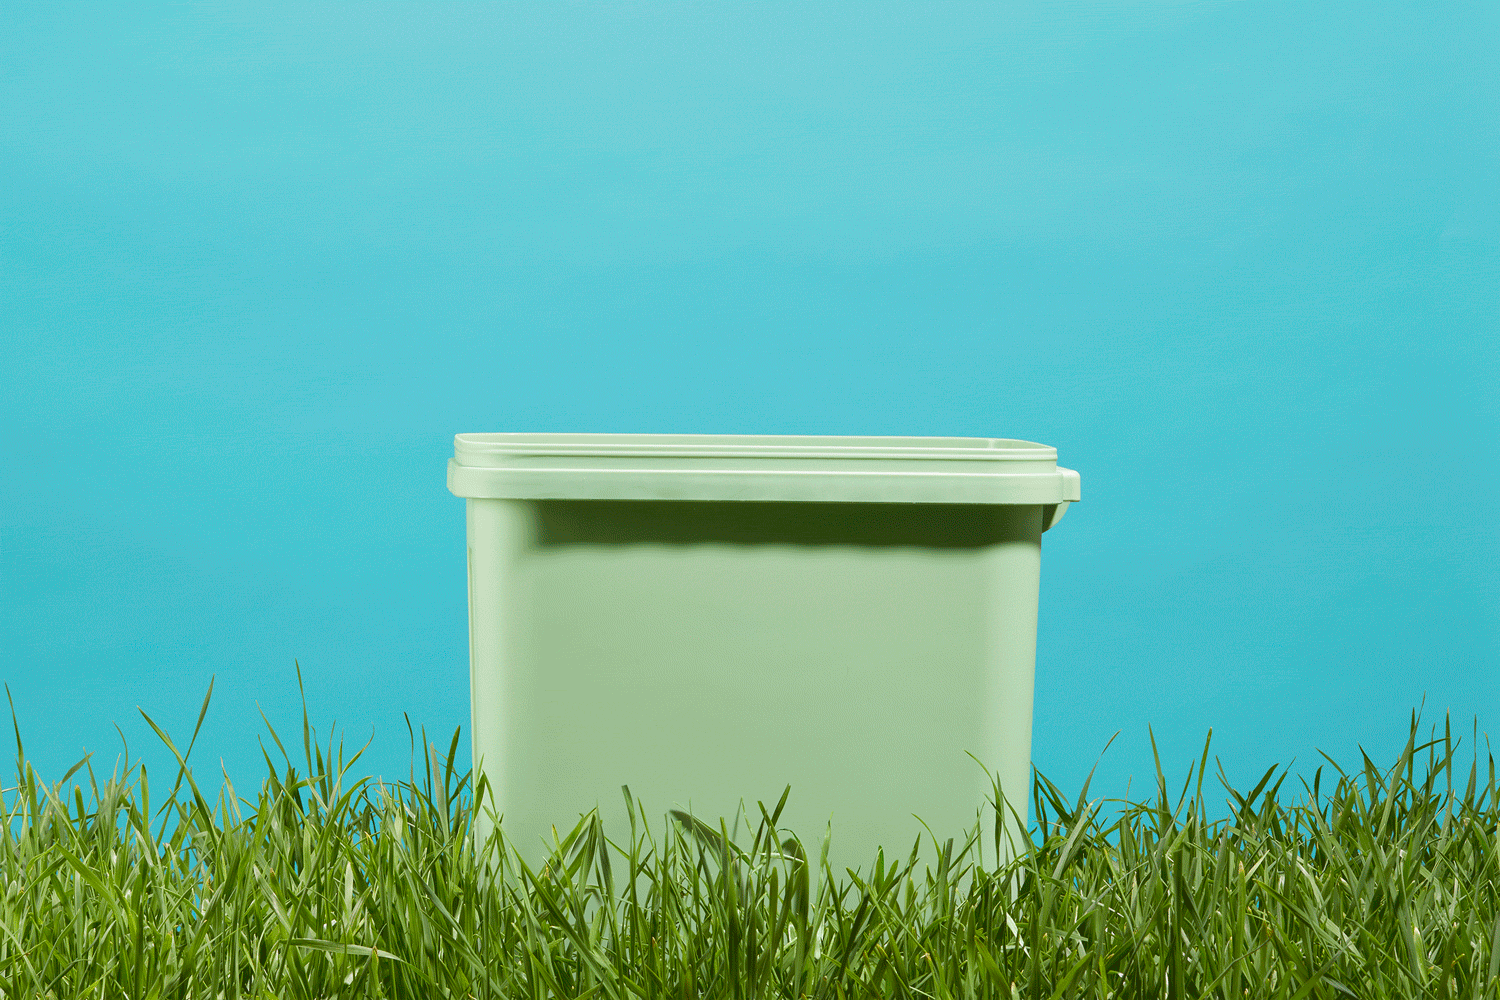 egg carton, milk carton, tin can, and glass bottle appearing in a recycling bin in grass on a blue background. Recycling for Sustainability